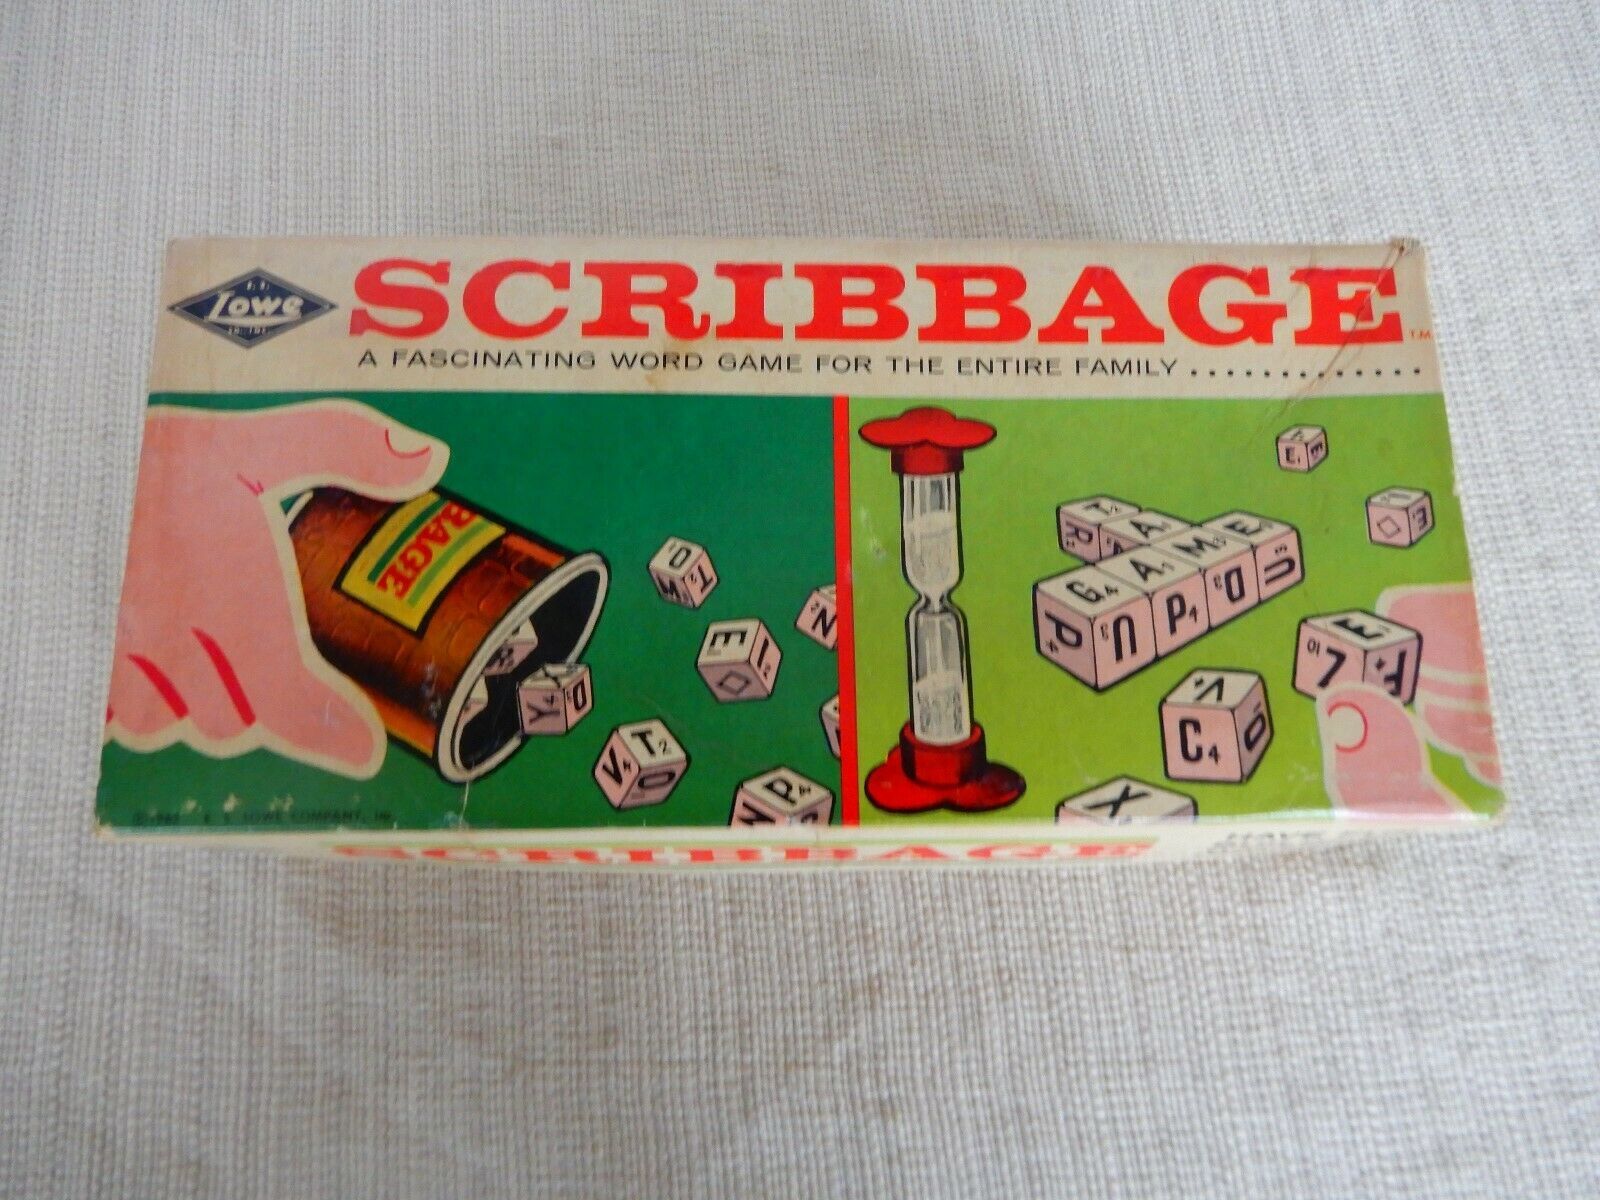 Scribbage 1967 vintage family fun word game by E.S. Lowe Company - $15.00